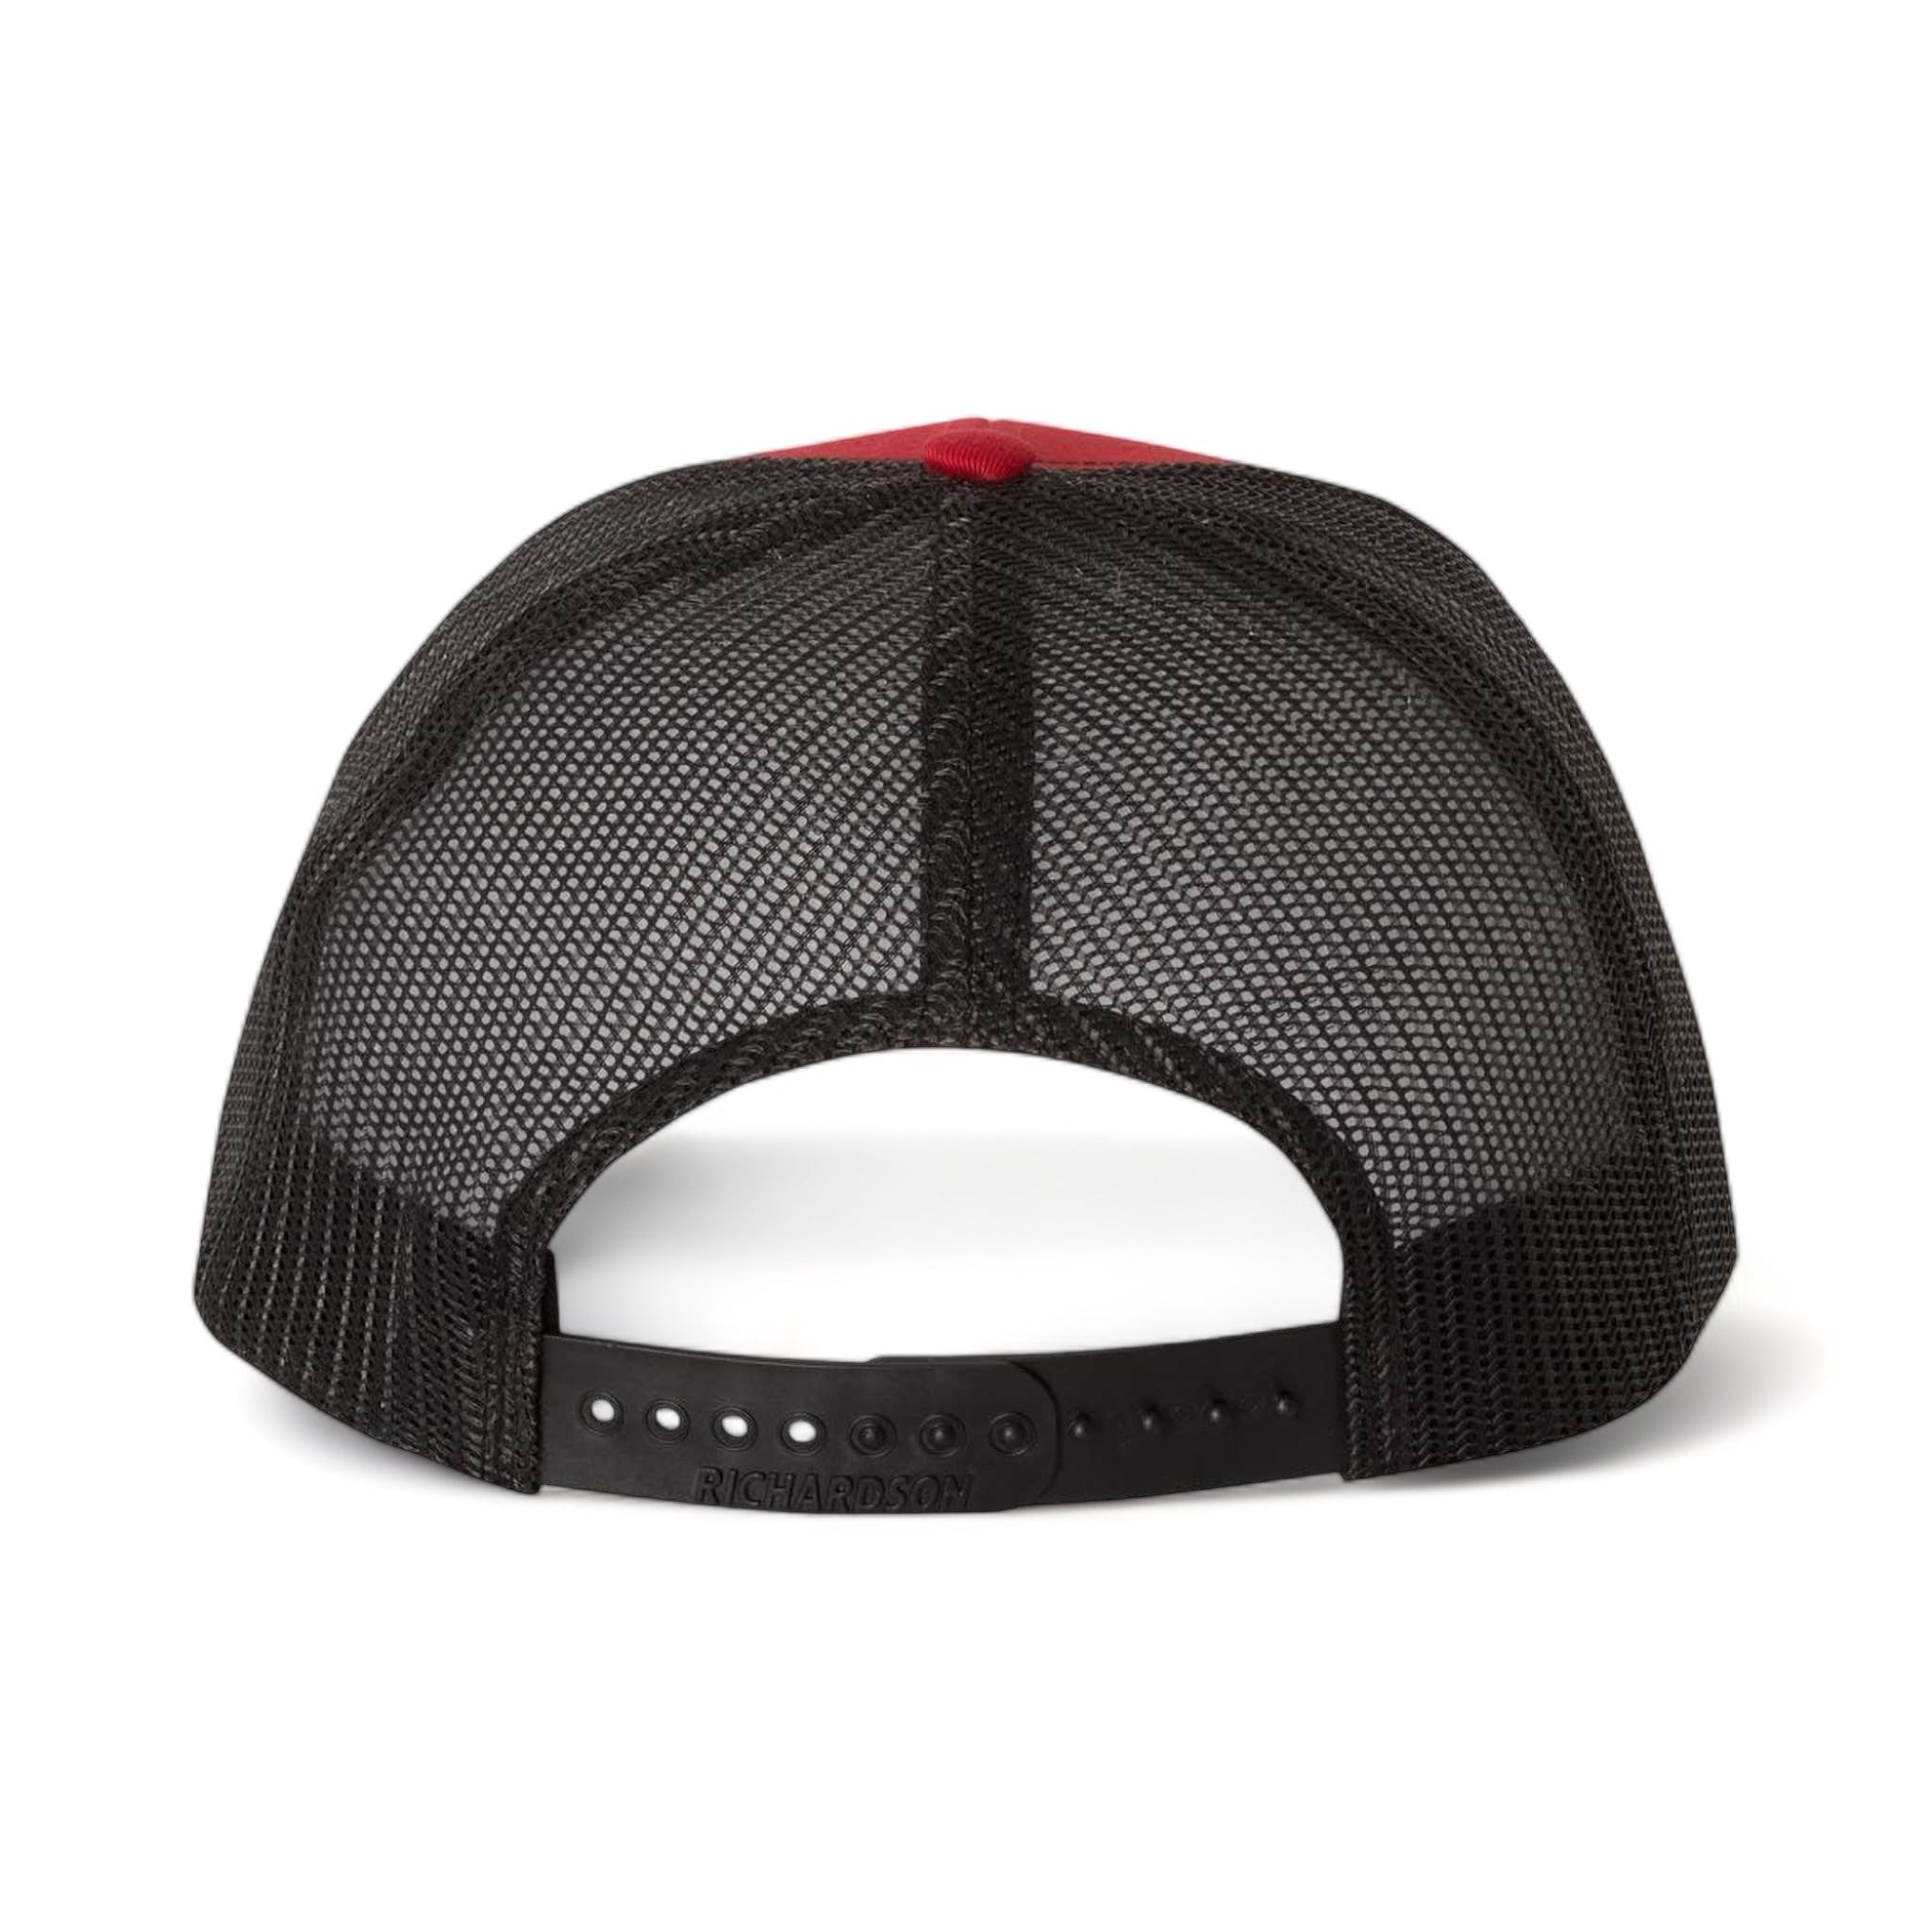 Back view of Richardson 112 custom hat in red and black